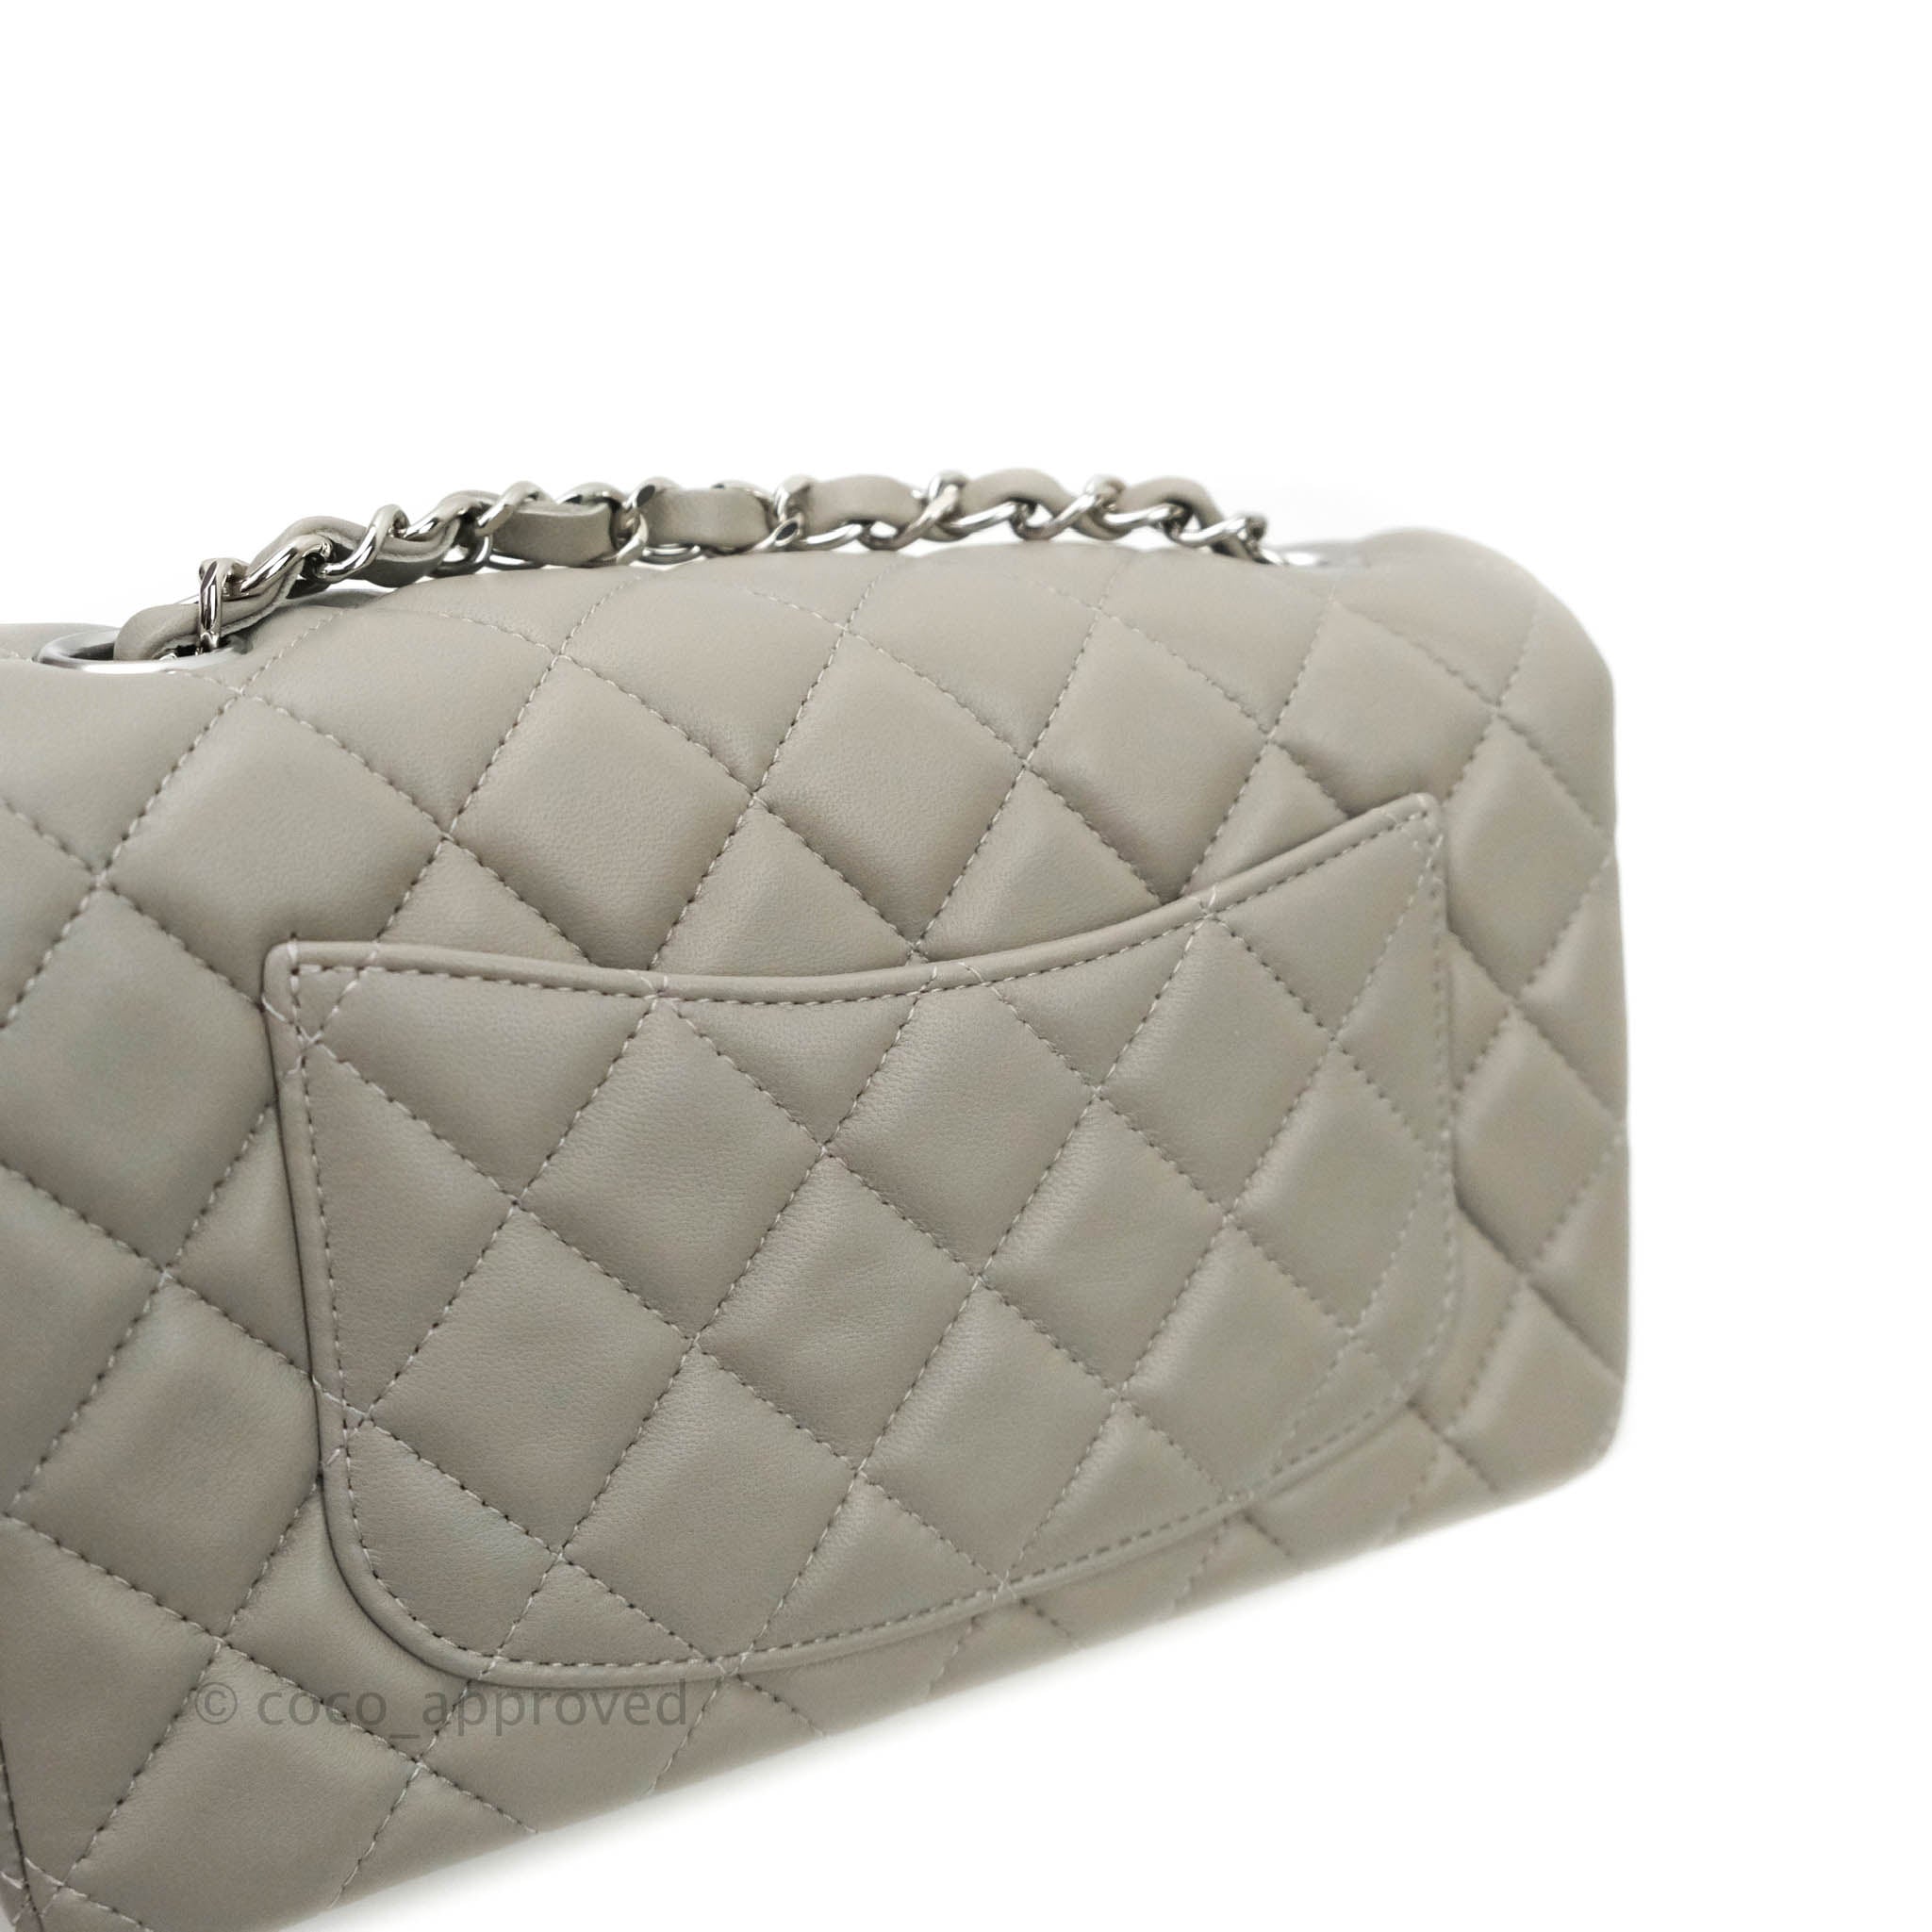 Chanel - Mini Square Classic Flap Bag - Grey Lambskin - CGHW - Excellent